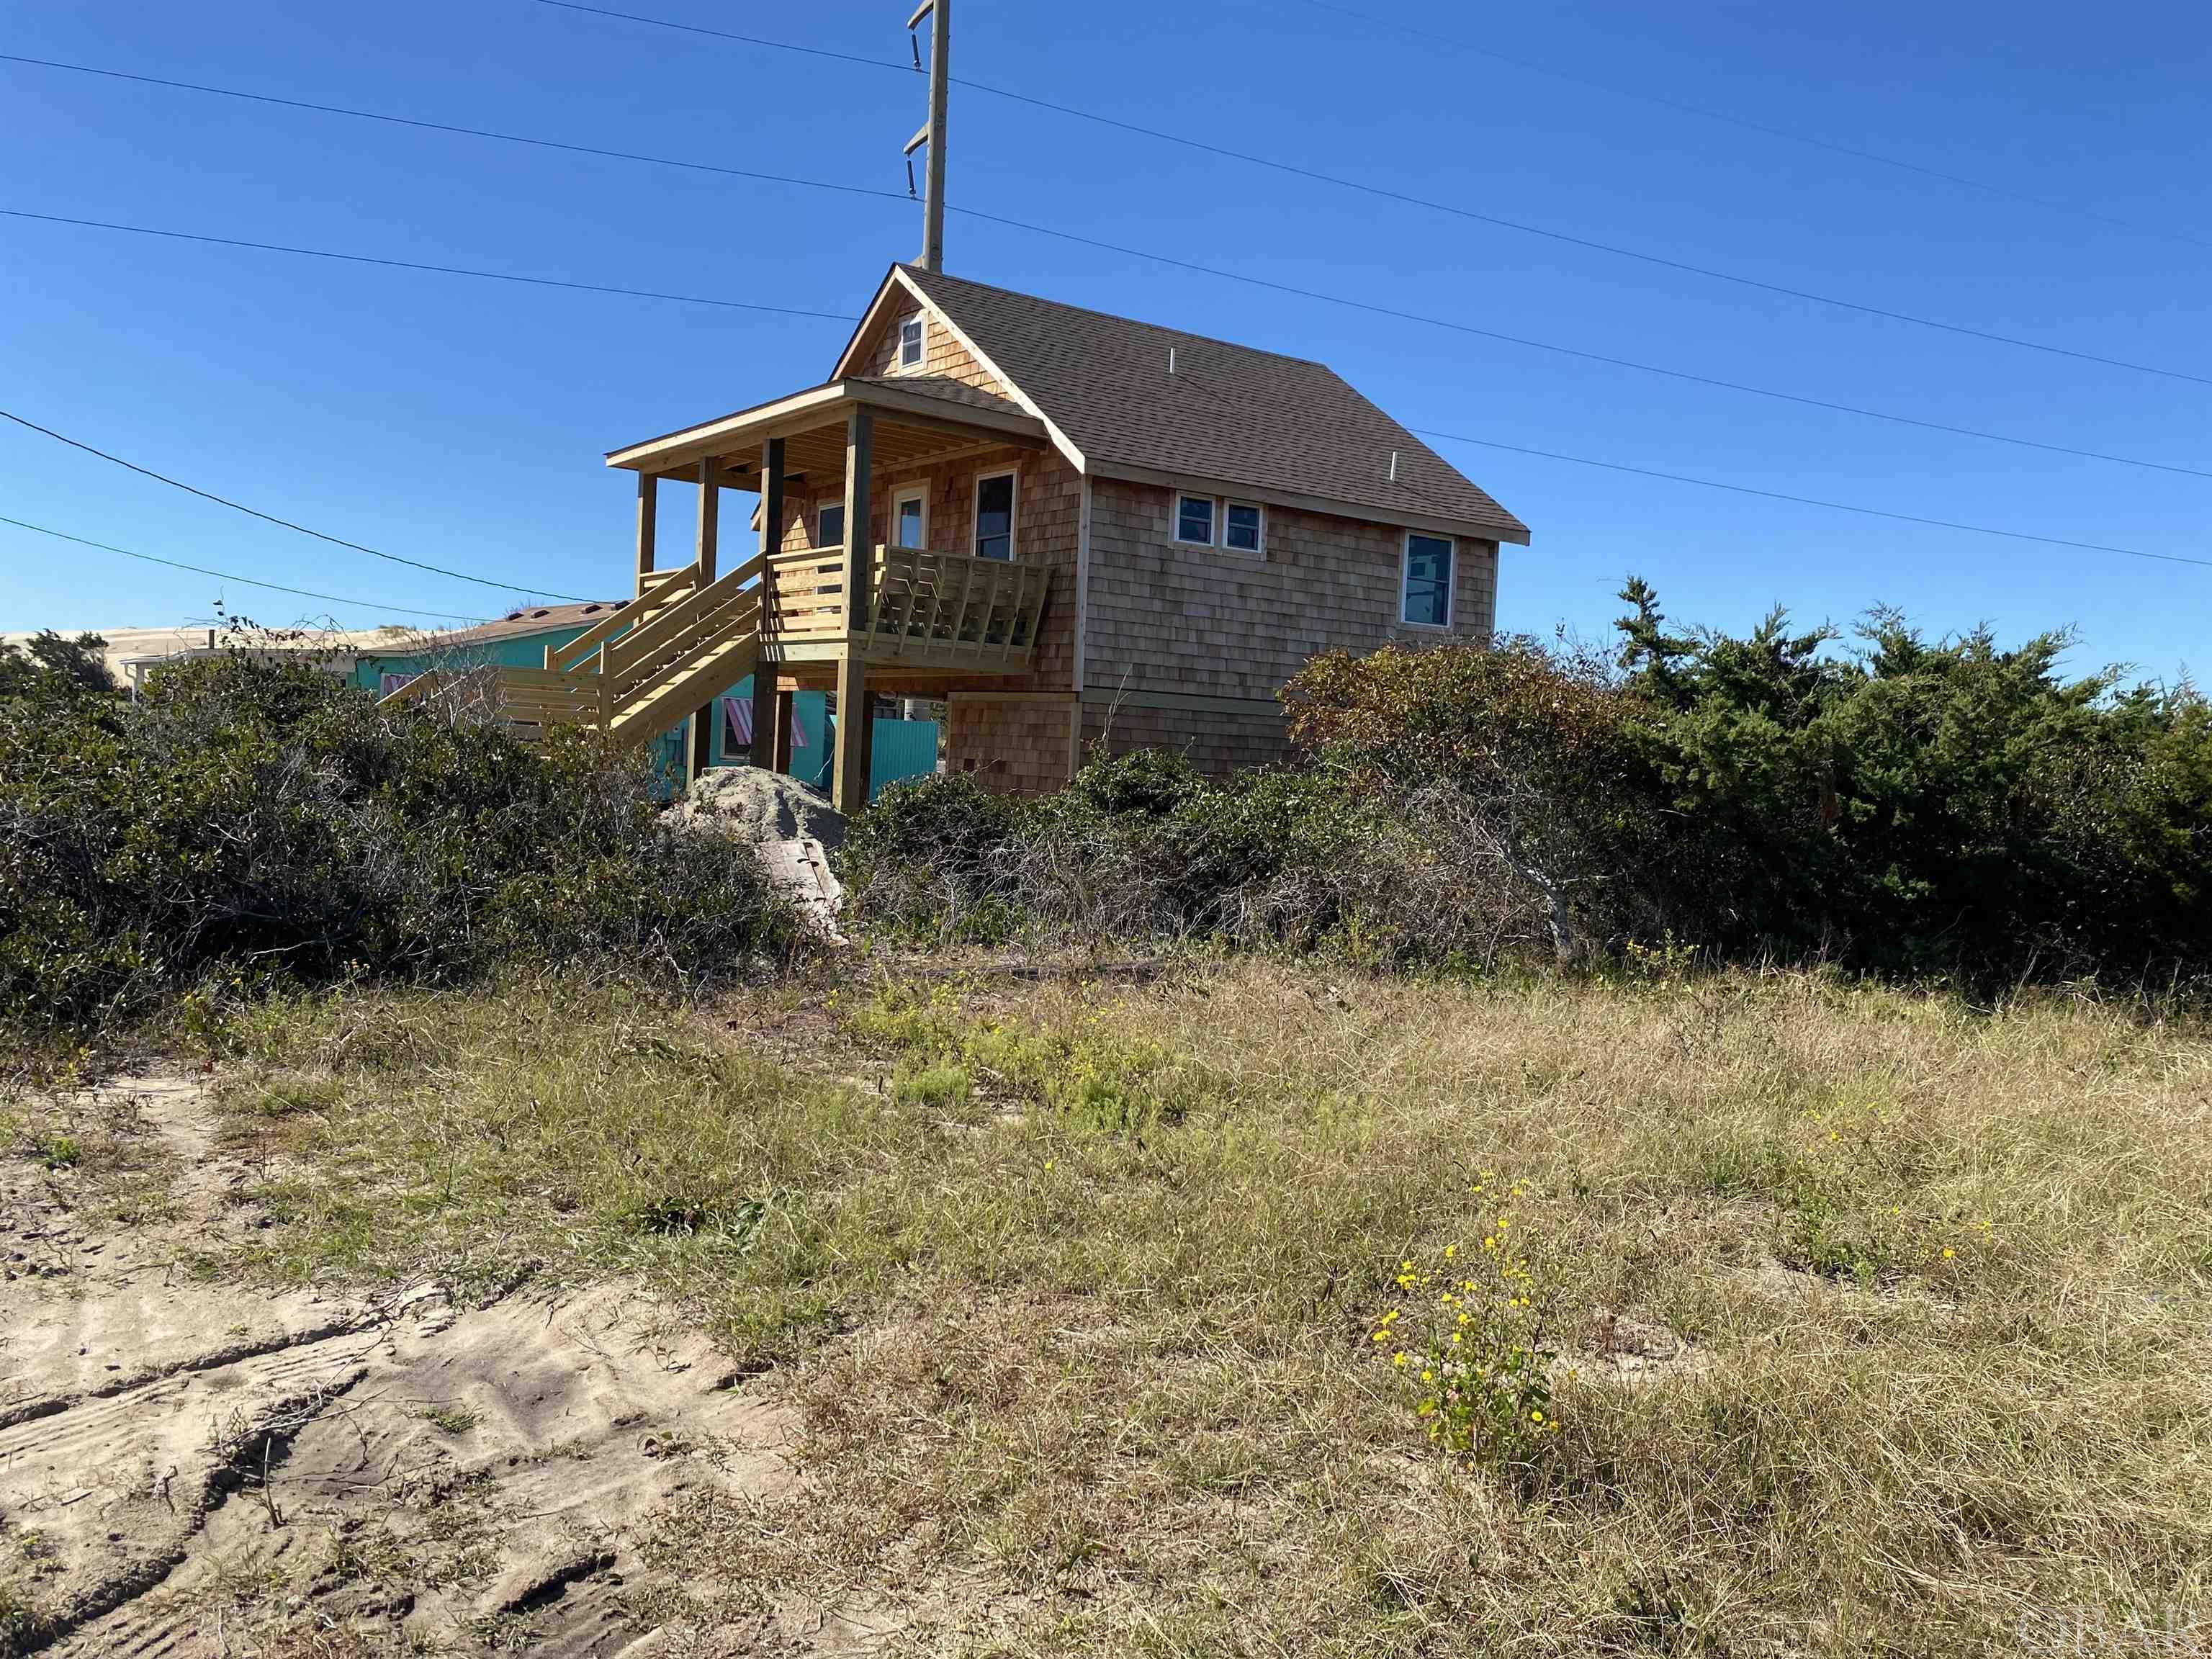 A classic Old Nags Head house that has been totally remodeled. This tiny 3 bedroom 2 bath house was gutted, raised on pilings and totally redone.  New wiring, plumbing, insulation, roof, AC, windows, decking, railings, stairs pine flooring, bathroom fixtures and appliances. Many of the interior walls will be painted wood If you are looking for a small house with the Old Nags Head vibe this one is for you. Sit on the built in front porch benches and enjoy ocean views to the east or watch the kites and hang gliders soaring over Jockeys Ridge to the West. Store all your beach toys and bikes in the large utility room. House is under construction please be careful.